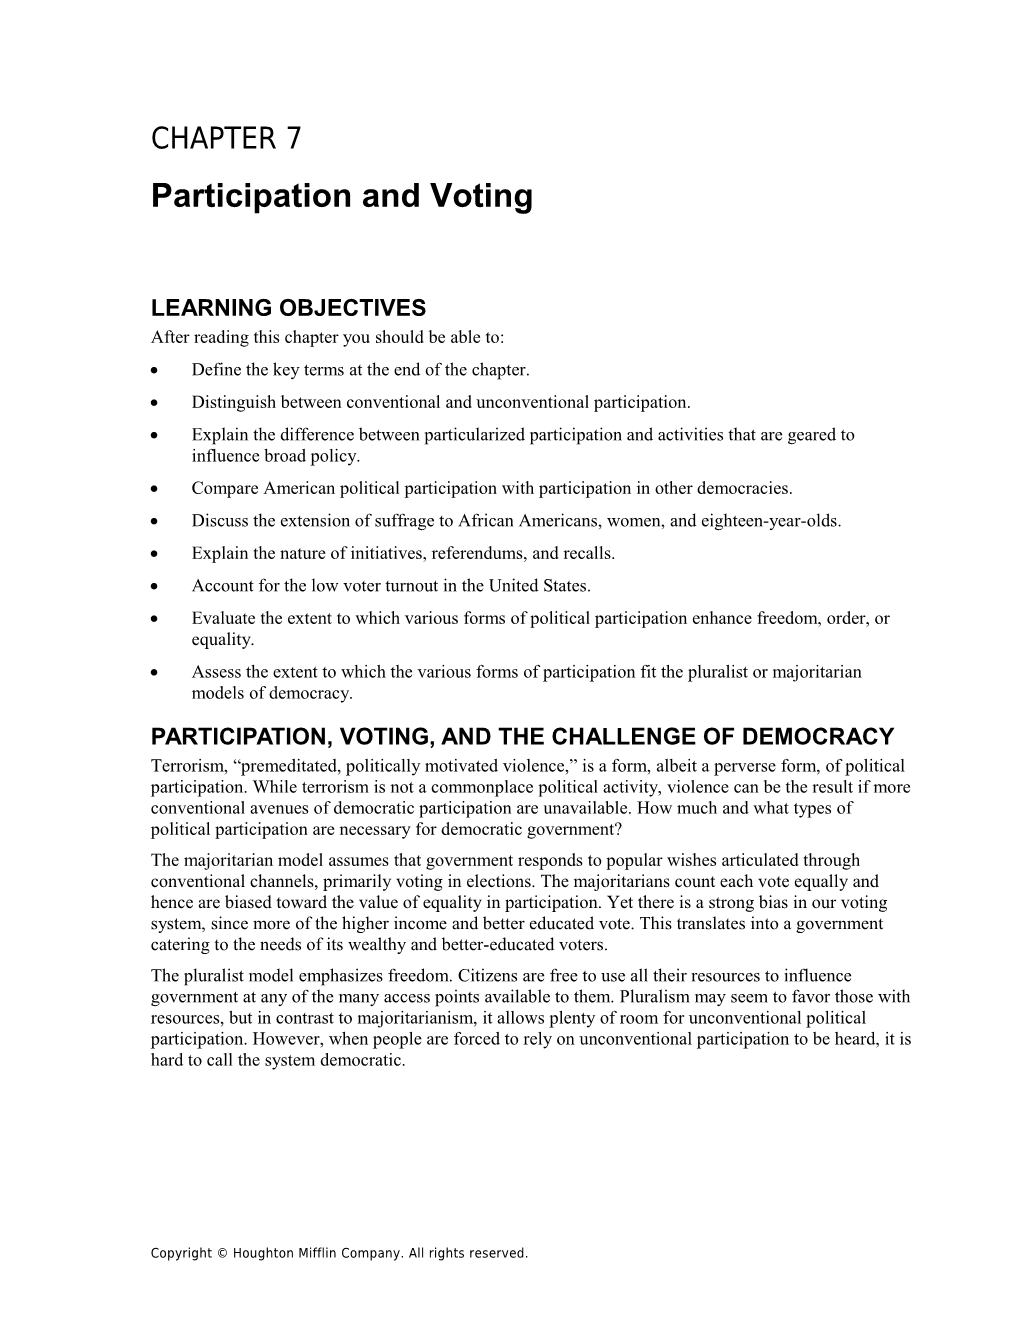 Chapter 7: Participation and Voting 1